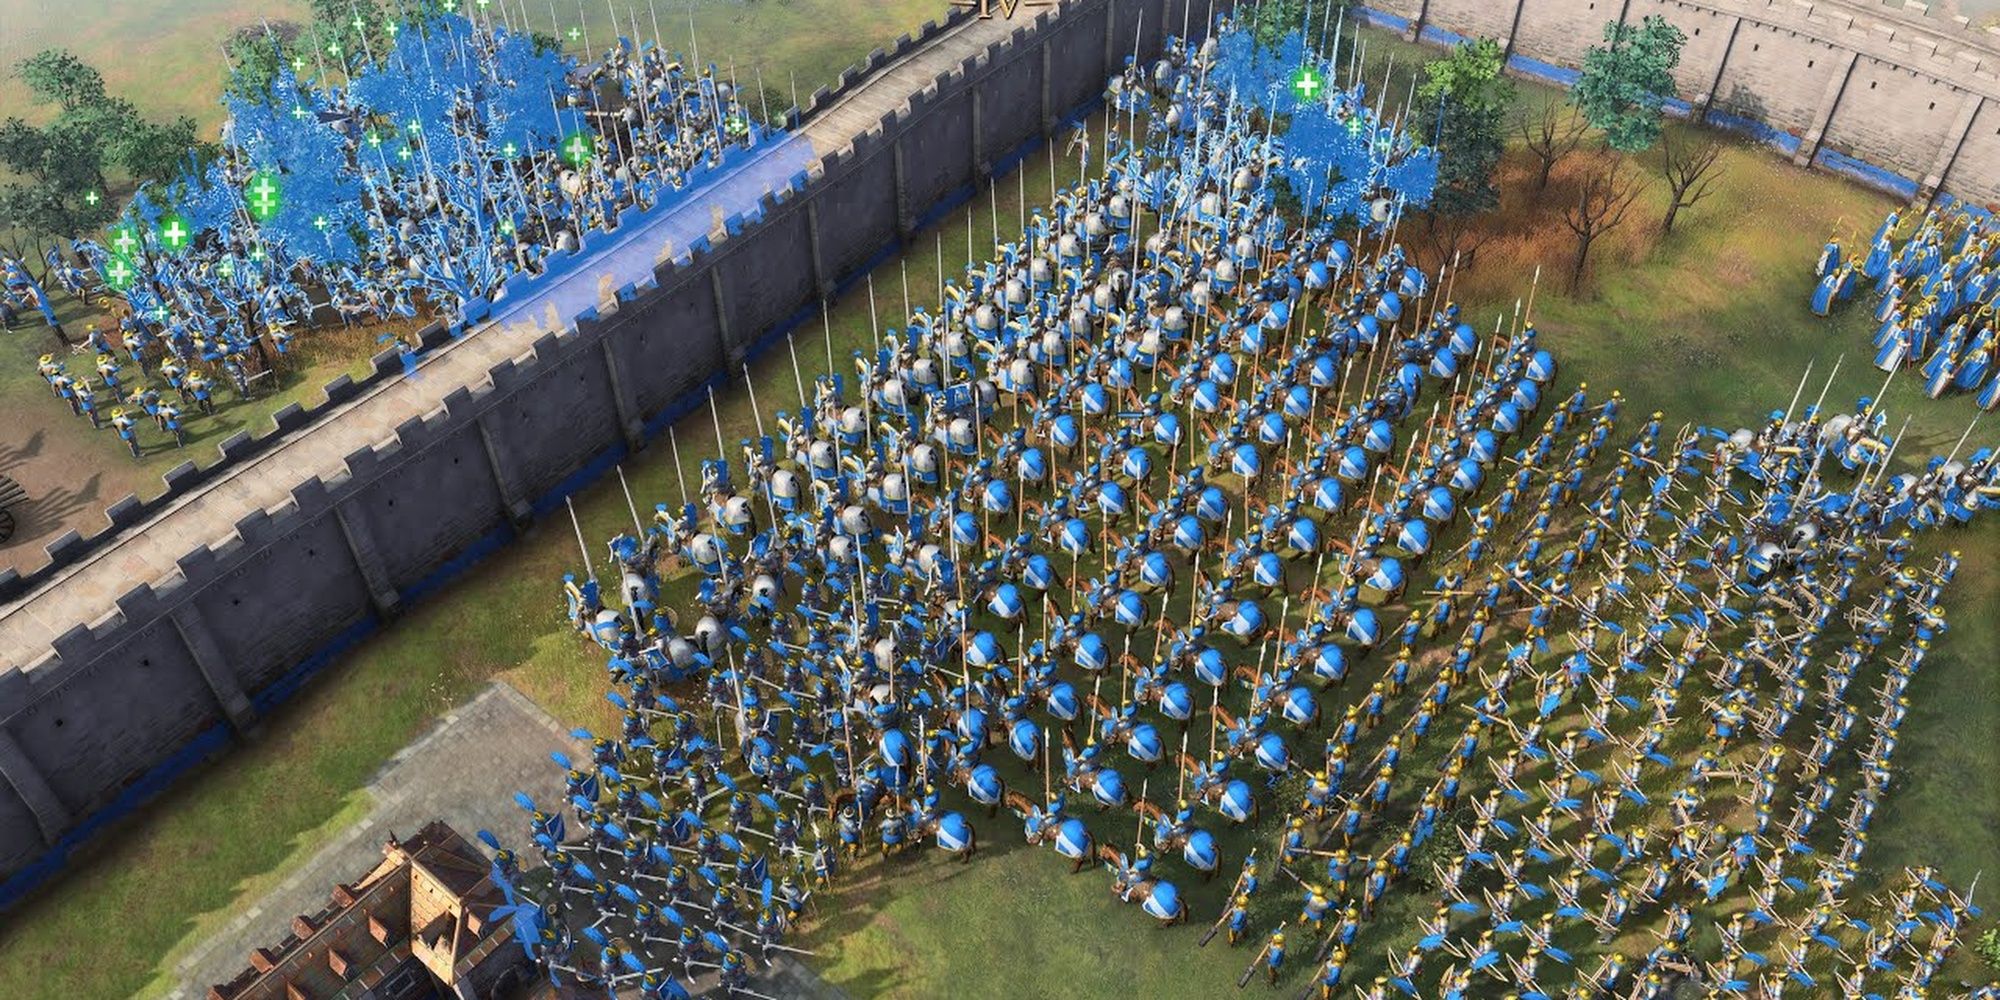 Age Of Empires IV: A Gigantic Army Spawned In With Cheats